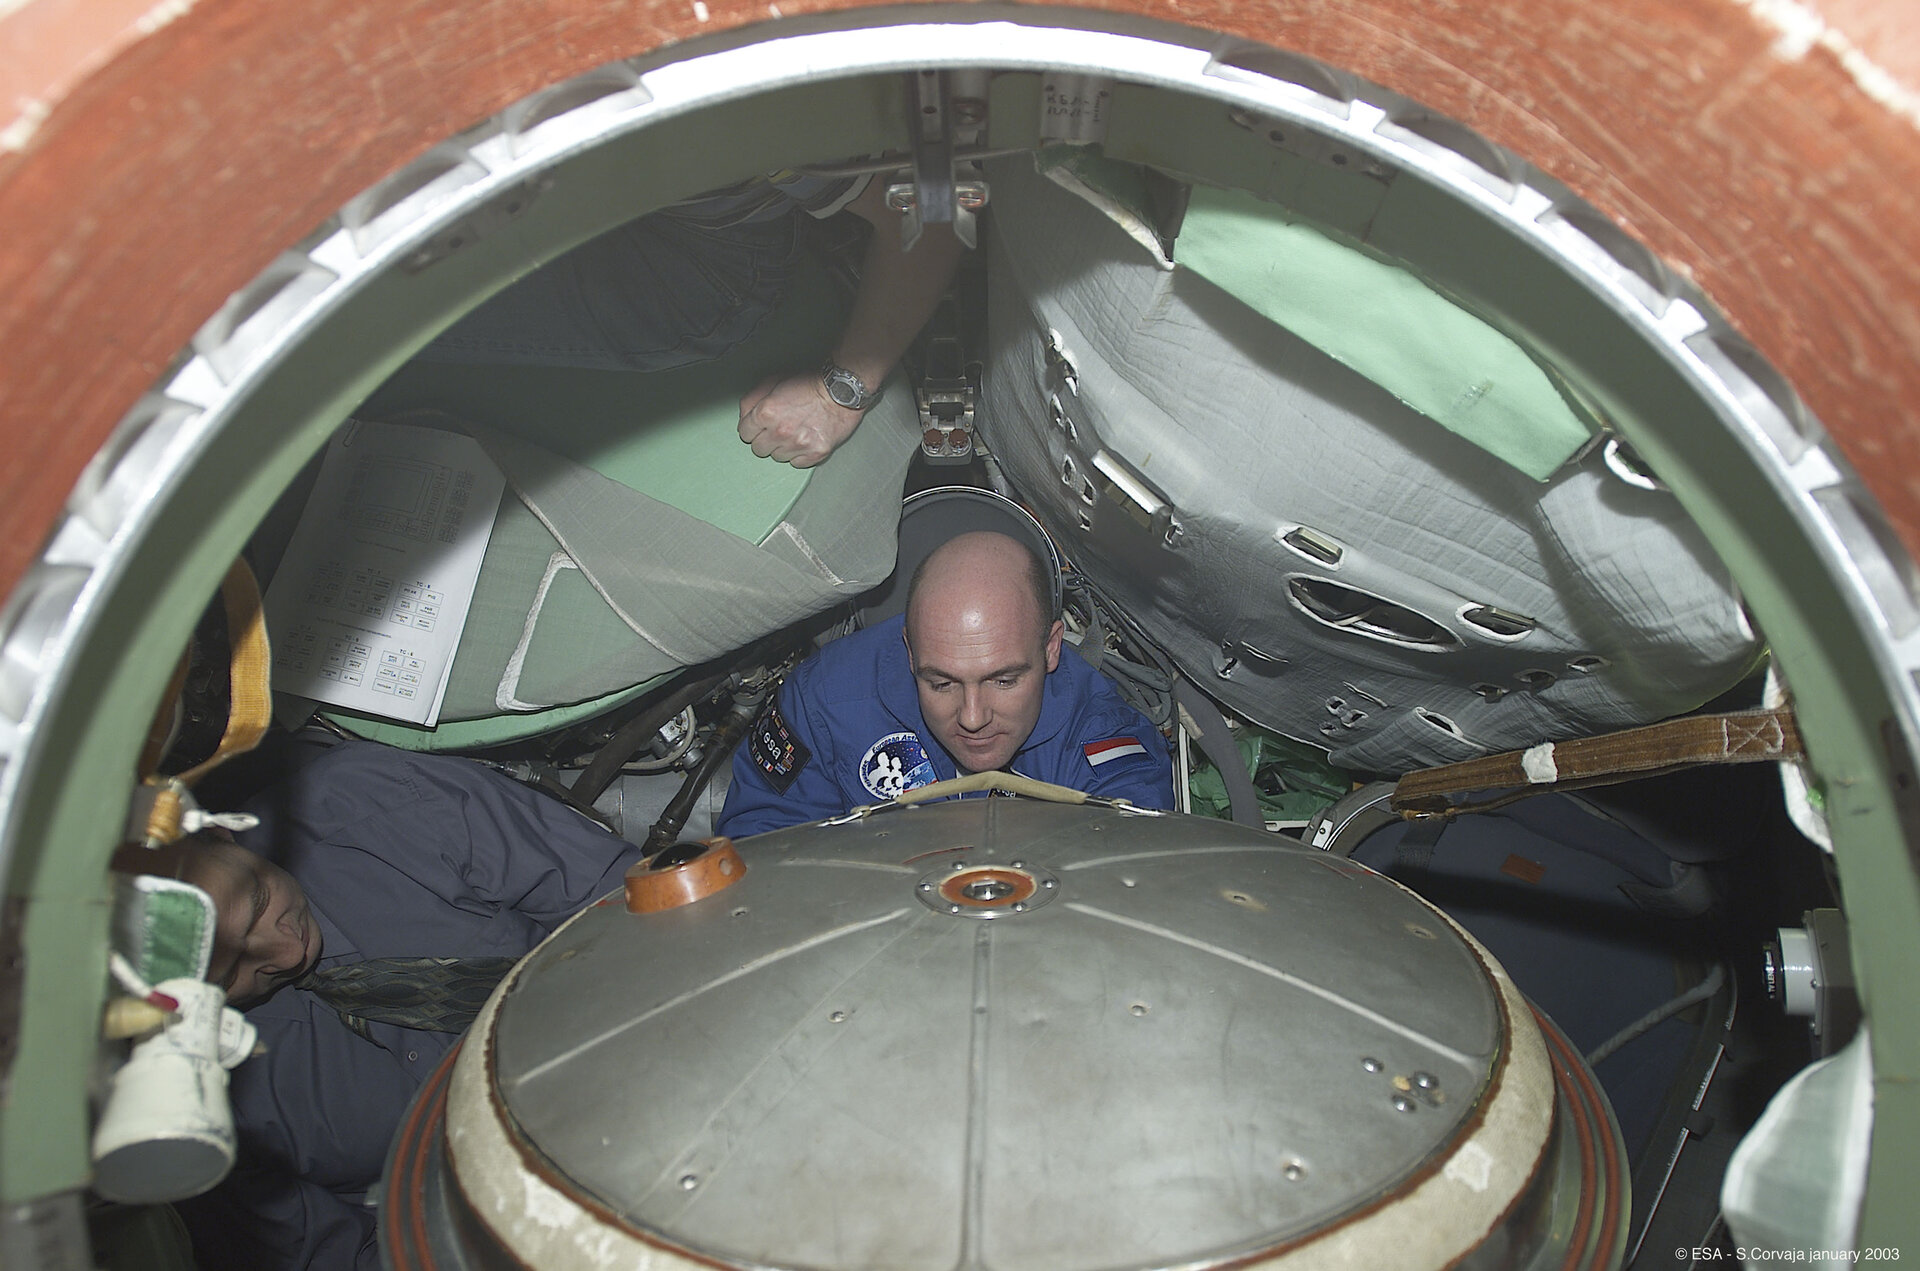 André Kuipers seated inside the Soyuz simulator